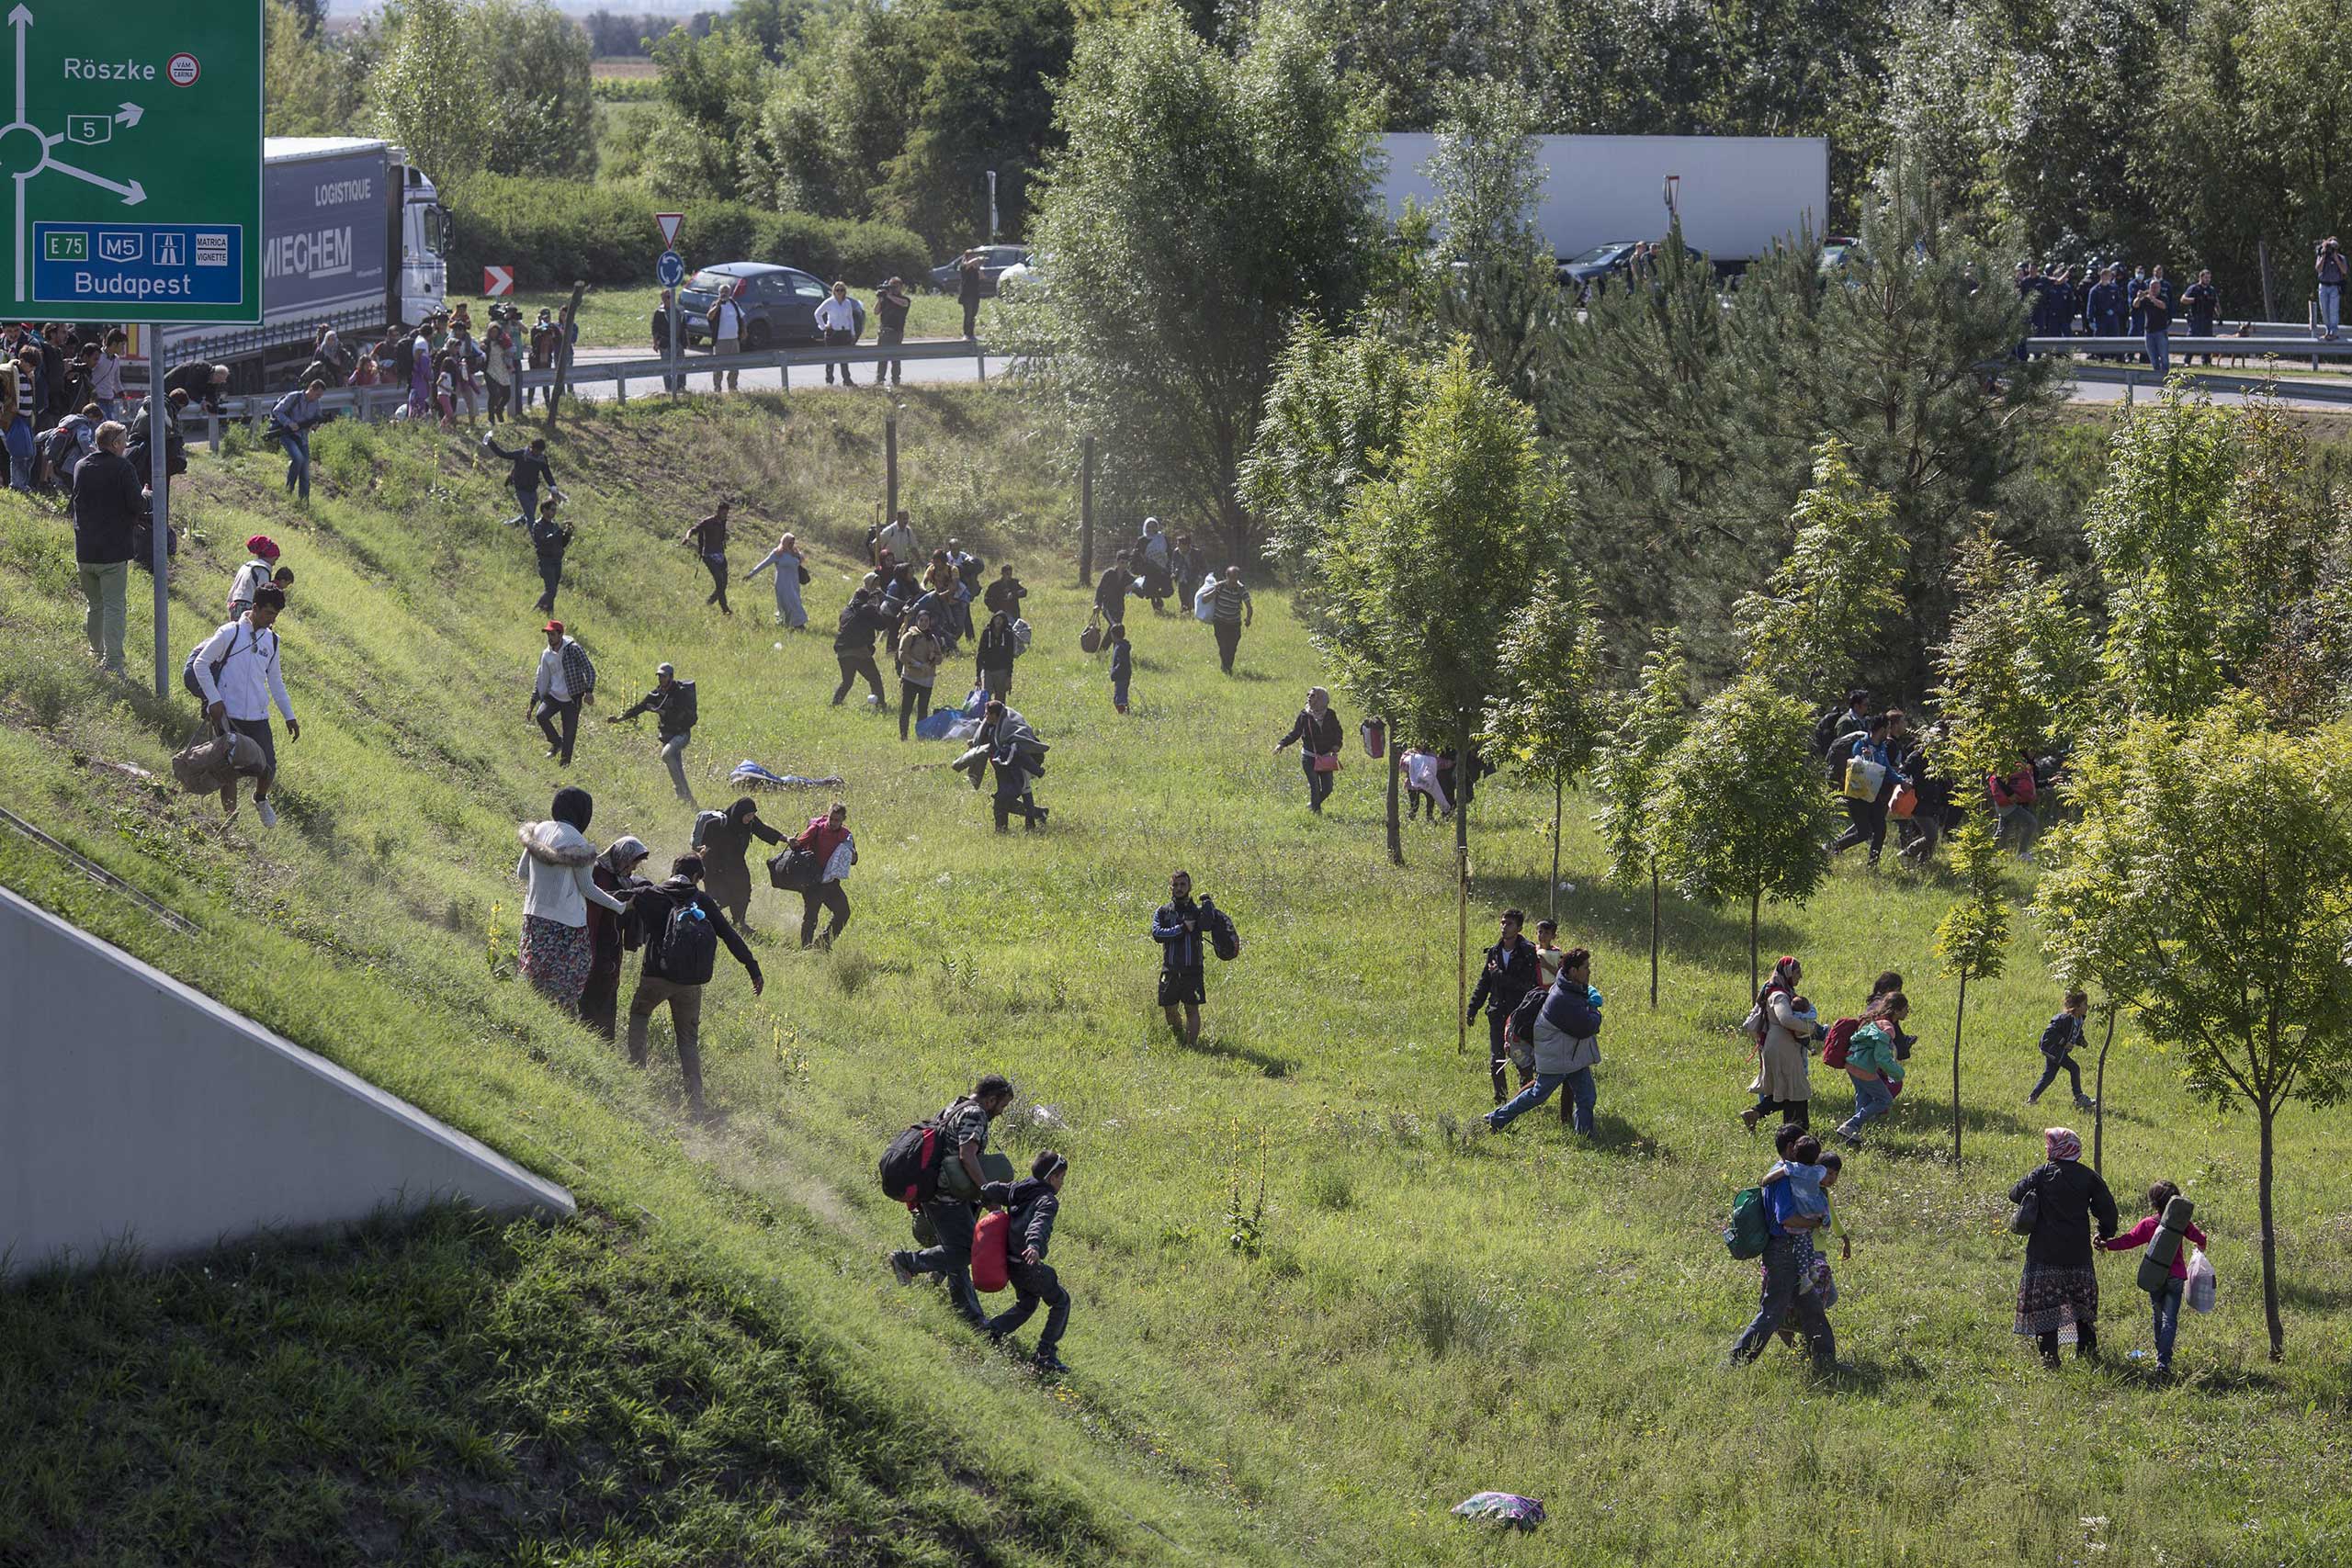 Migrants run over a motorway from a collection point that had been set up to transport people to camps in Morahalom, Hungary, on Sept. 9, 2015.